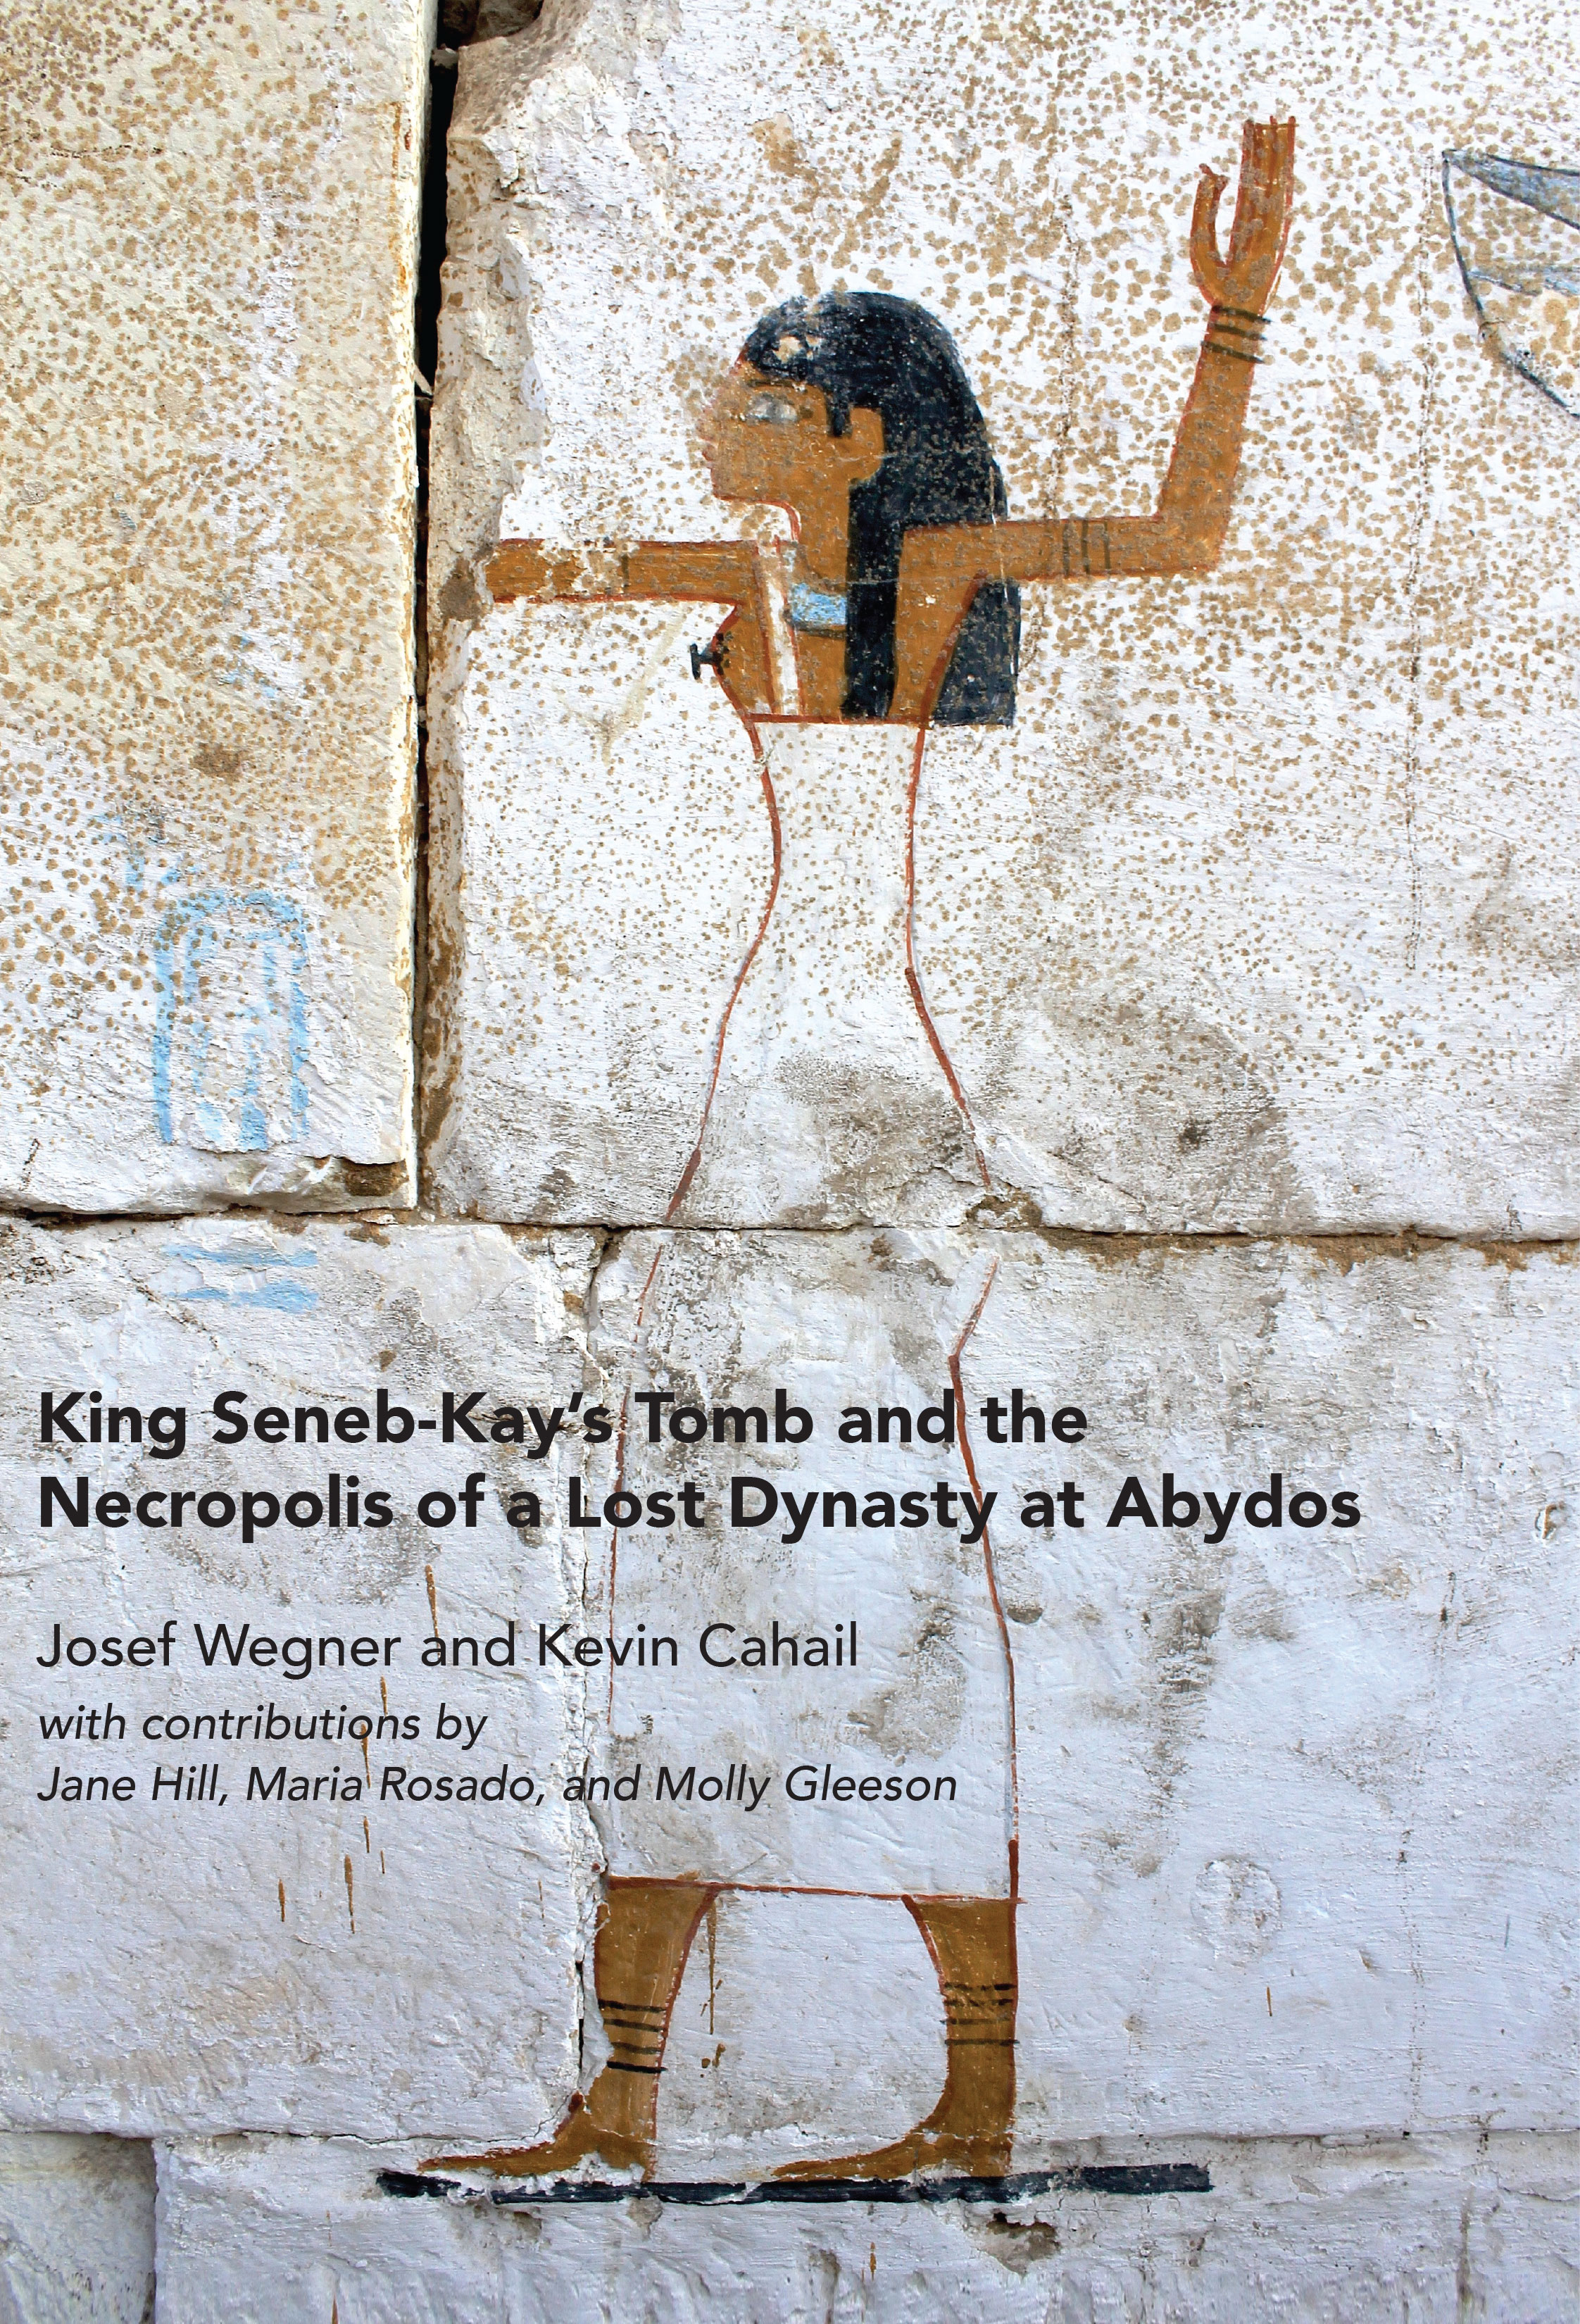 King Seneb-Kay’s Tomb and the Necropolis of a Lost Dynasty at Abydos